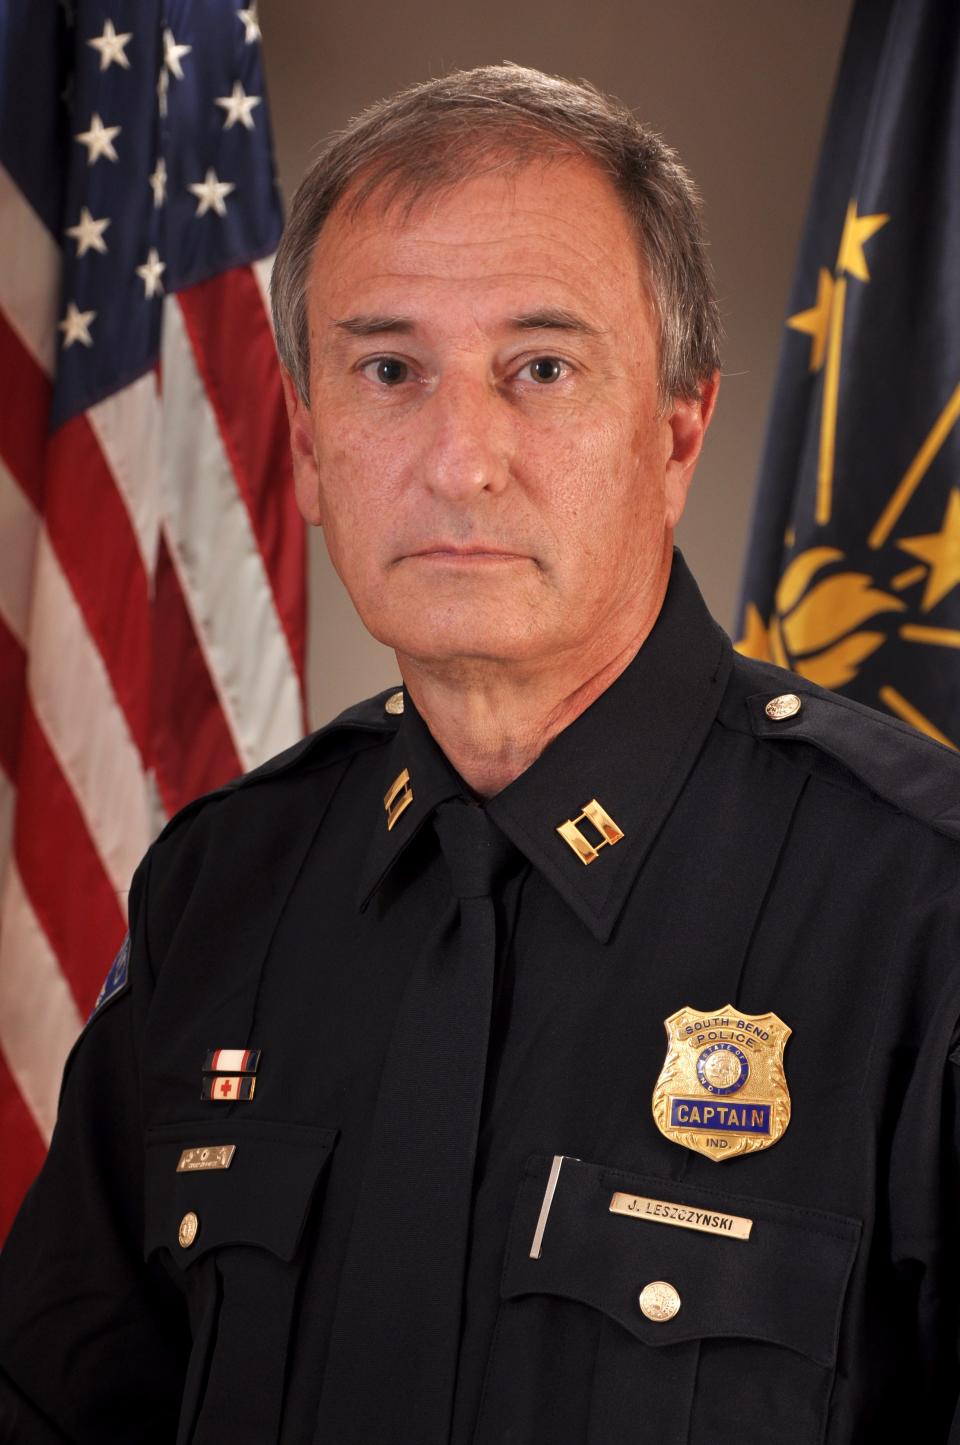 On March 20, 2023, the South Bend Police Department announced that Mayor James Mueller had appointed Capt. Joseph Leszczynski as the department's patrol division chief, replacing Capt. Eric Crittendon, who is retiring. Leszczynski had been the captain of 2nd Detail Patrol.